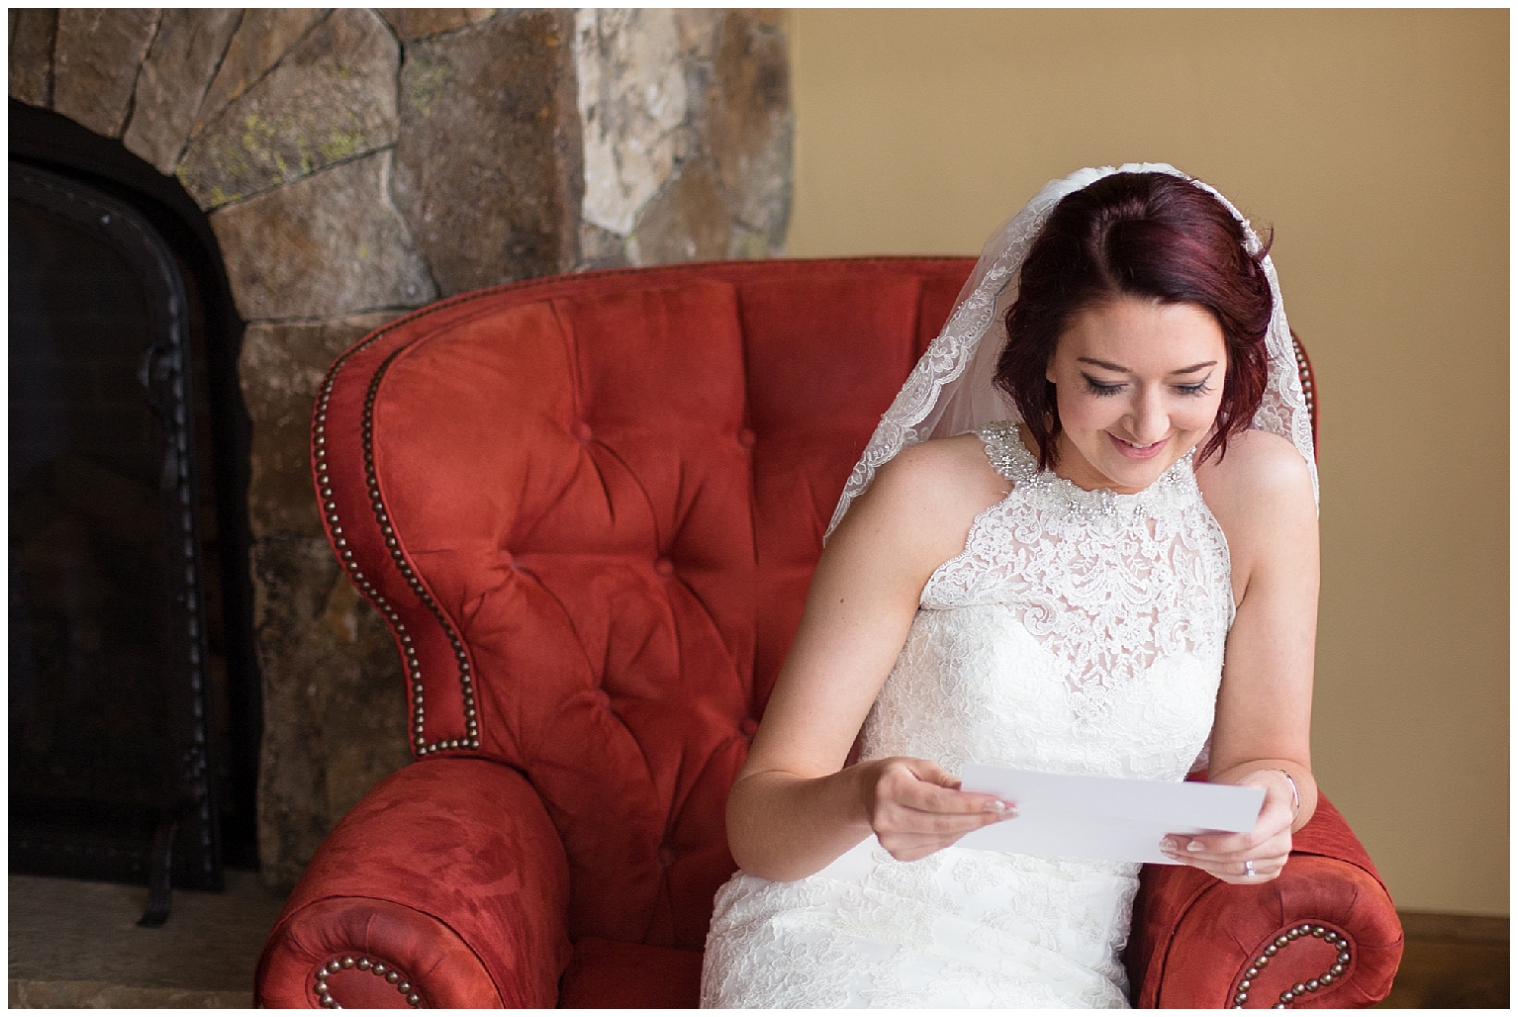 Bride reads a letter from her groom before her Sevens wedding.